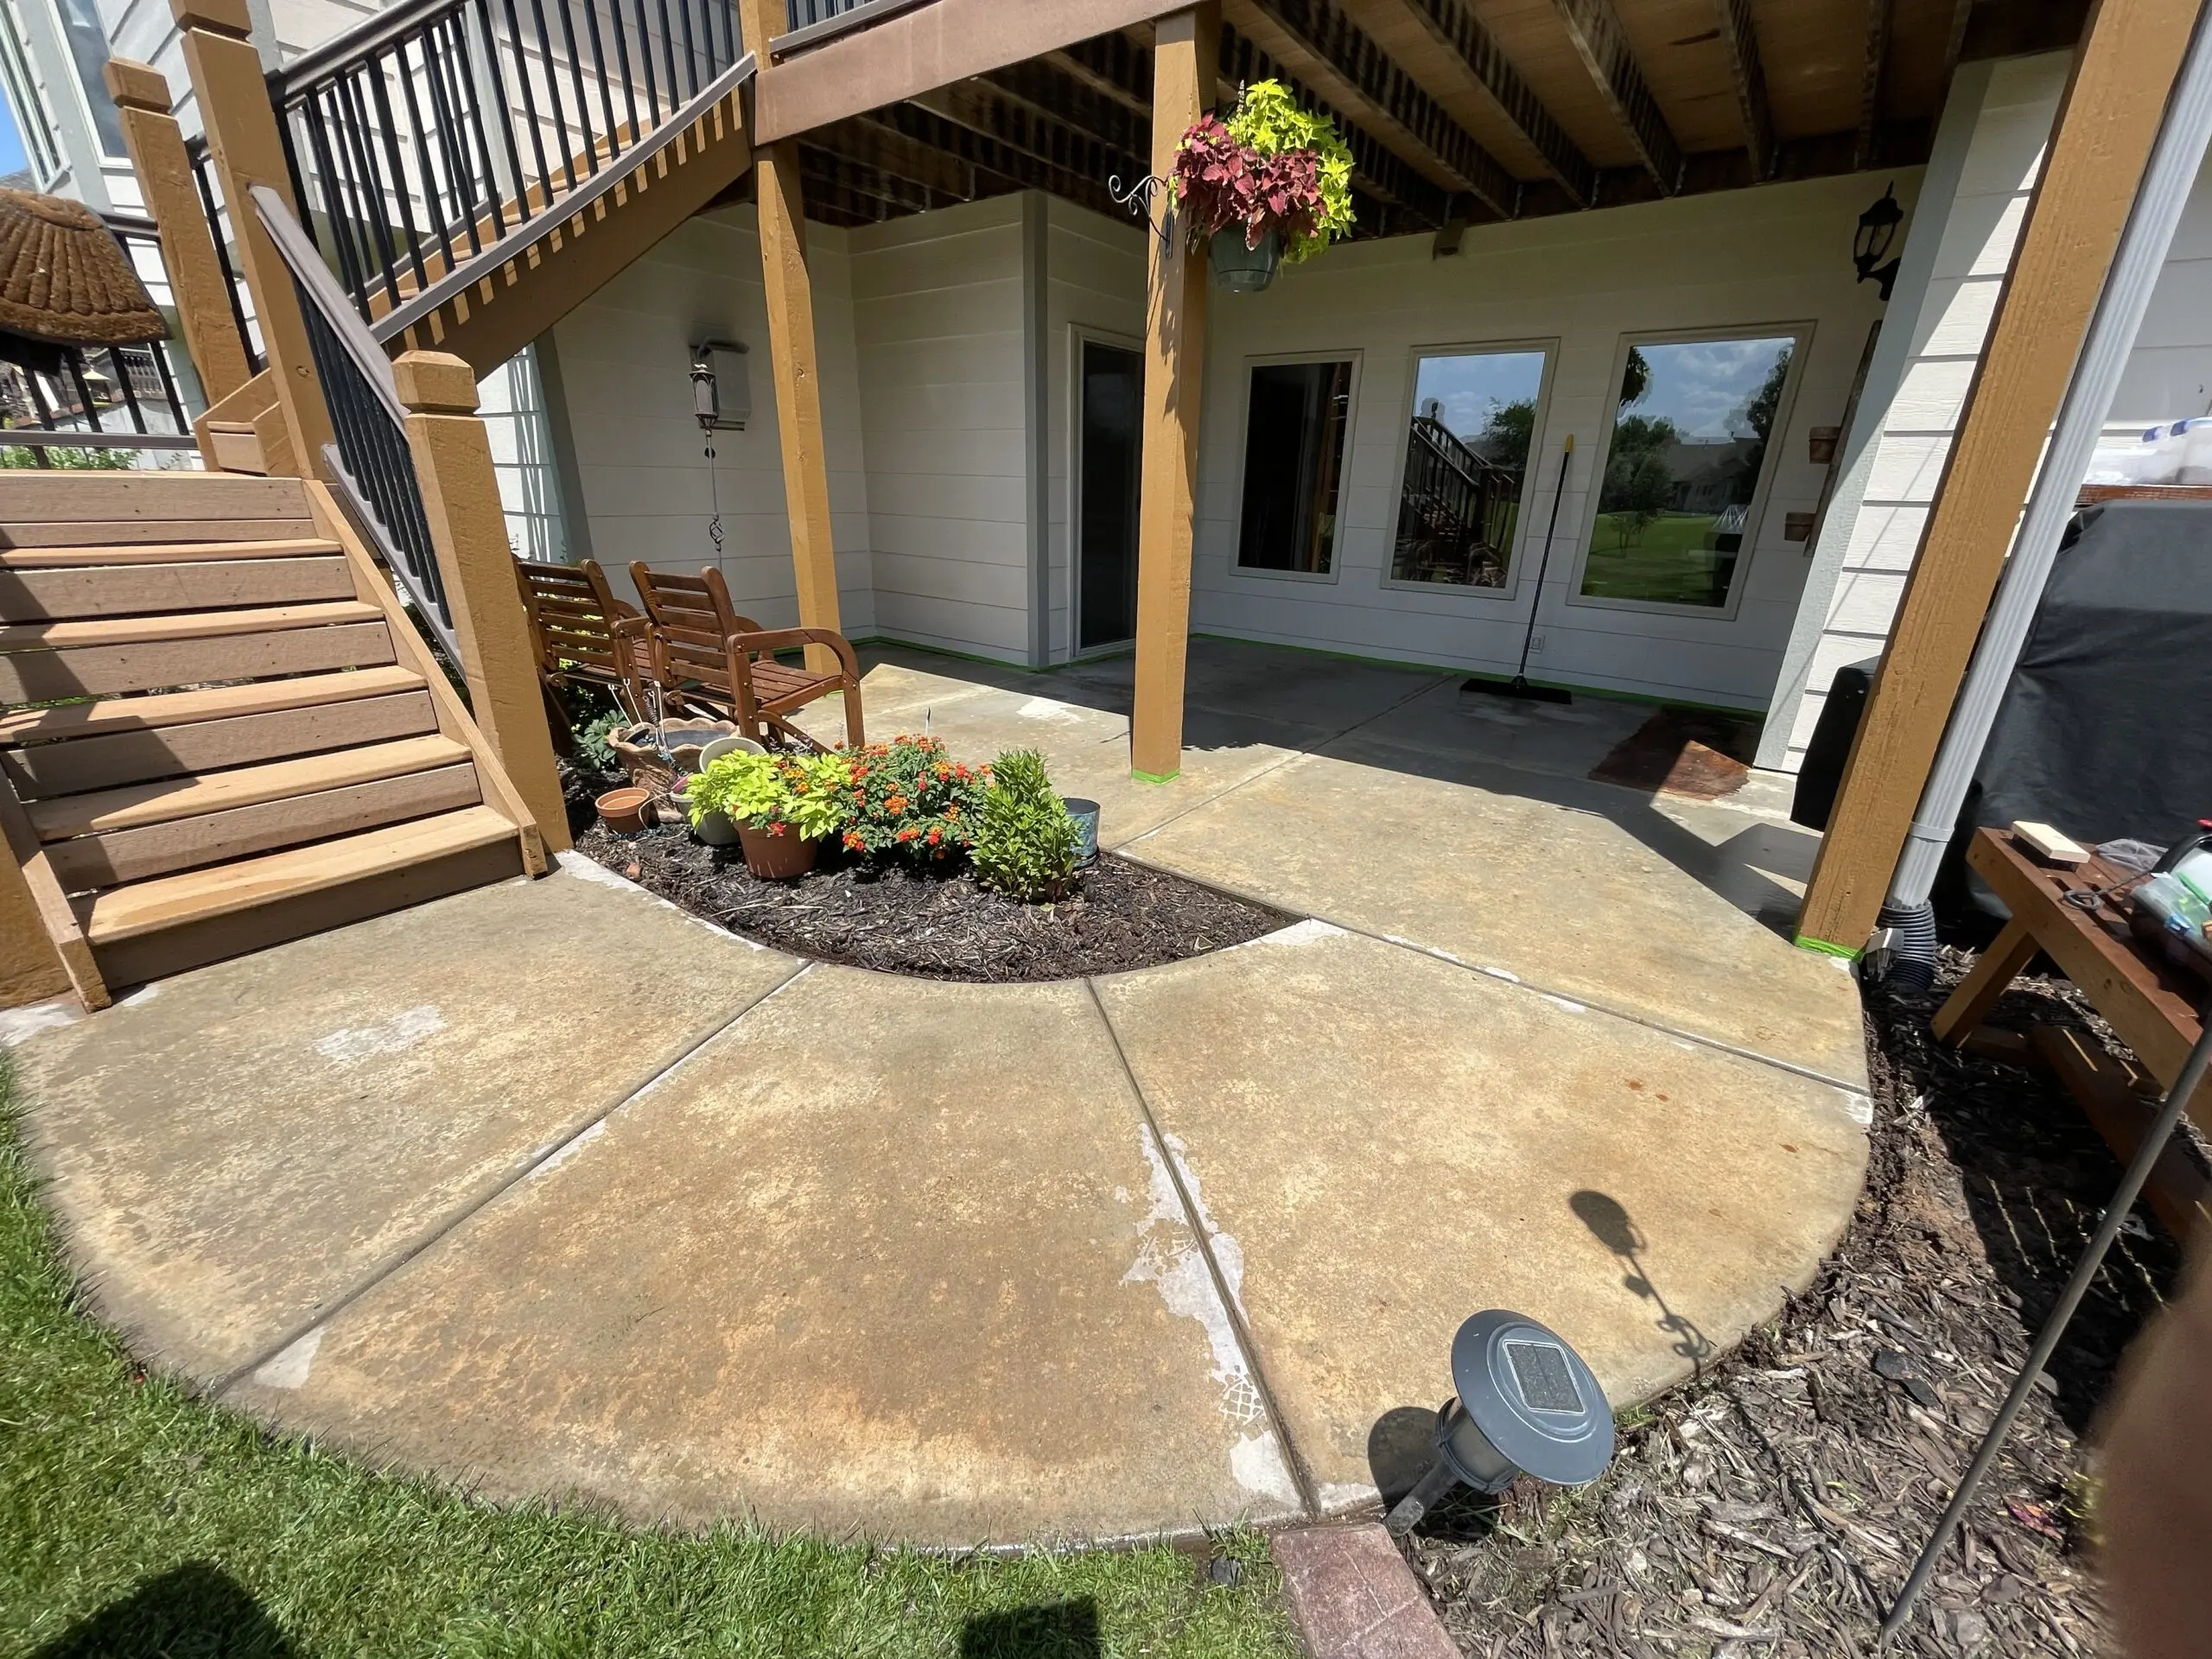 Round patio before application, showing dull concrete surface